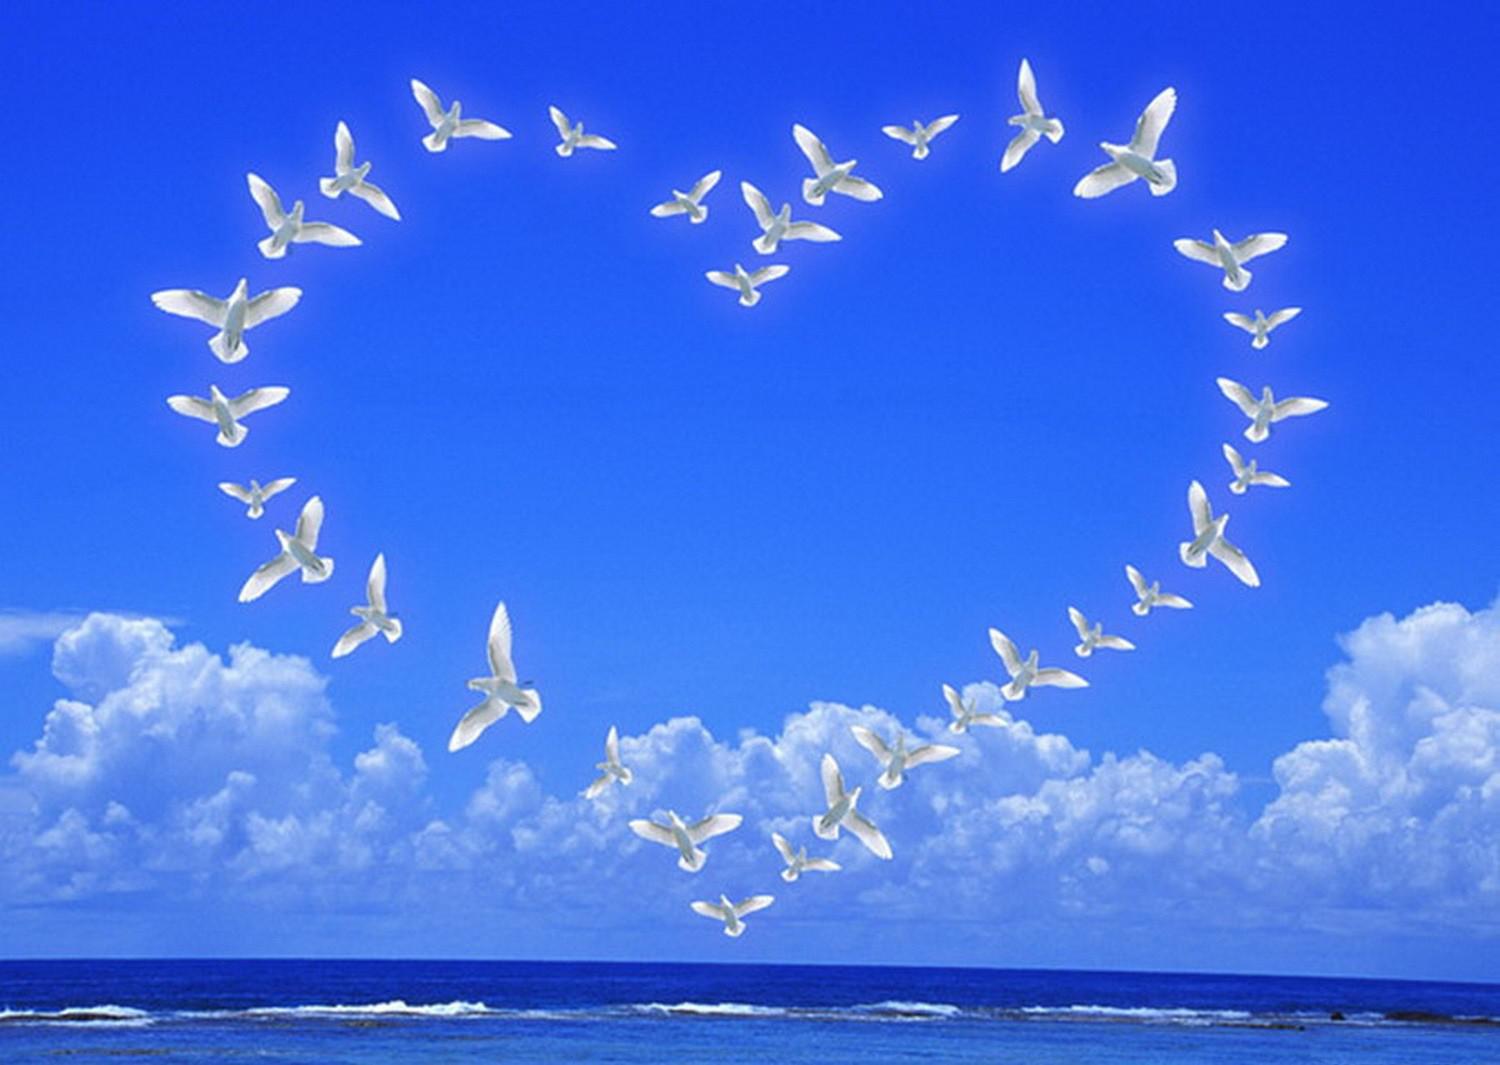 Love and peace - (#105012) - High Quality and Resolution ...